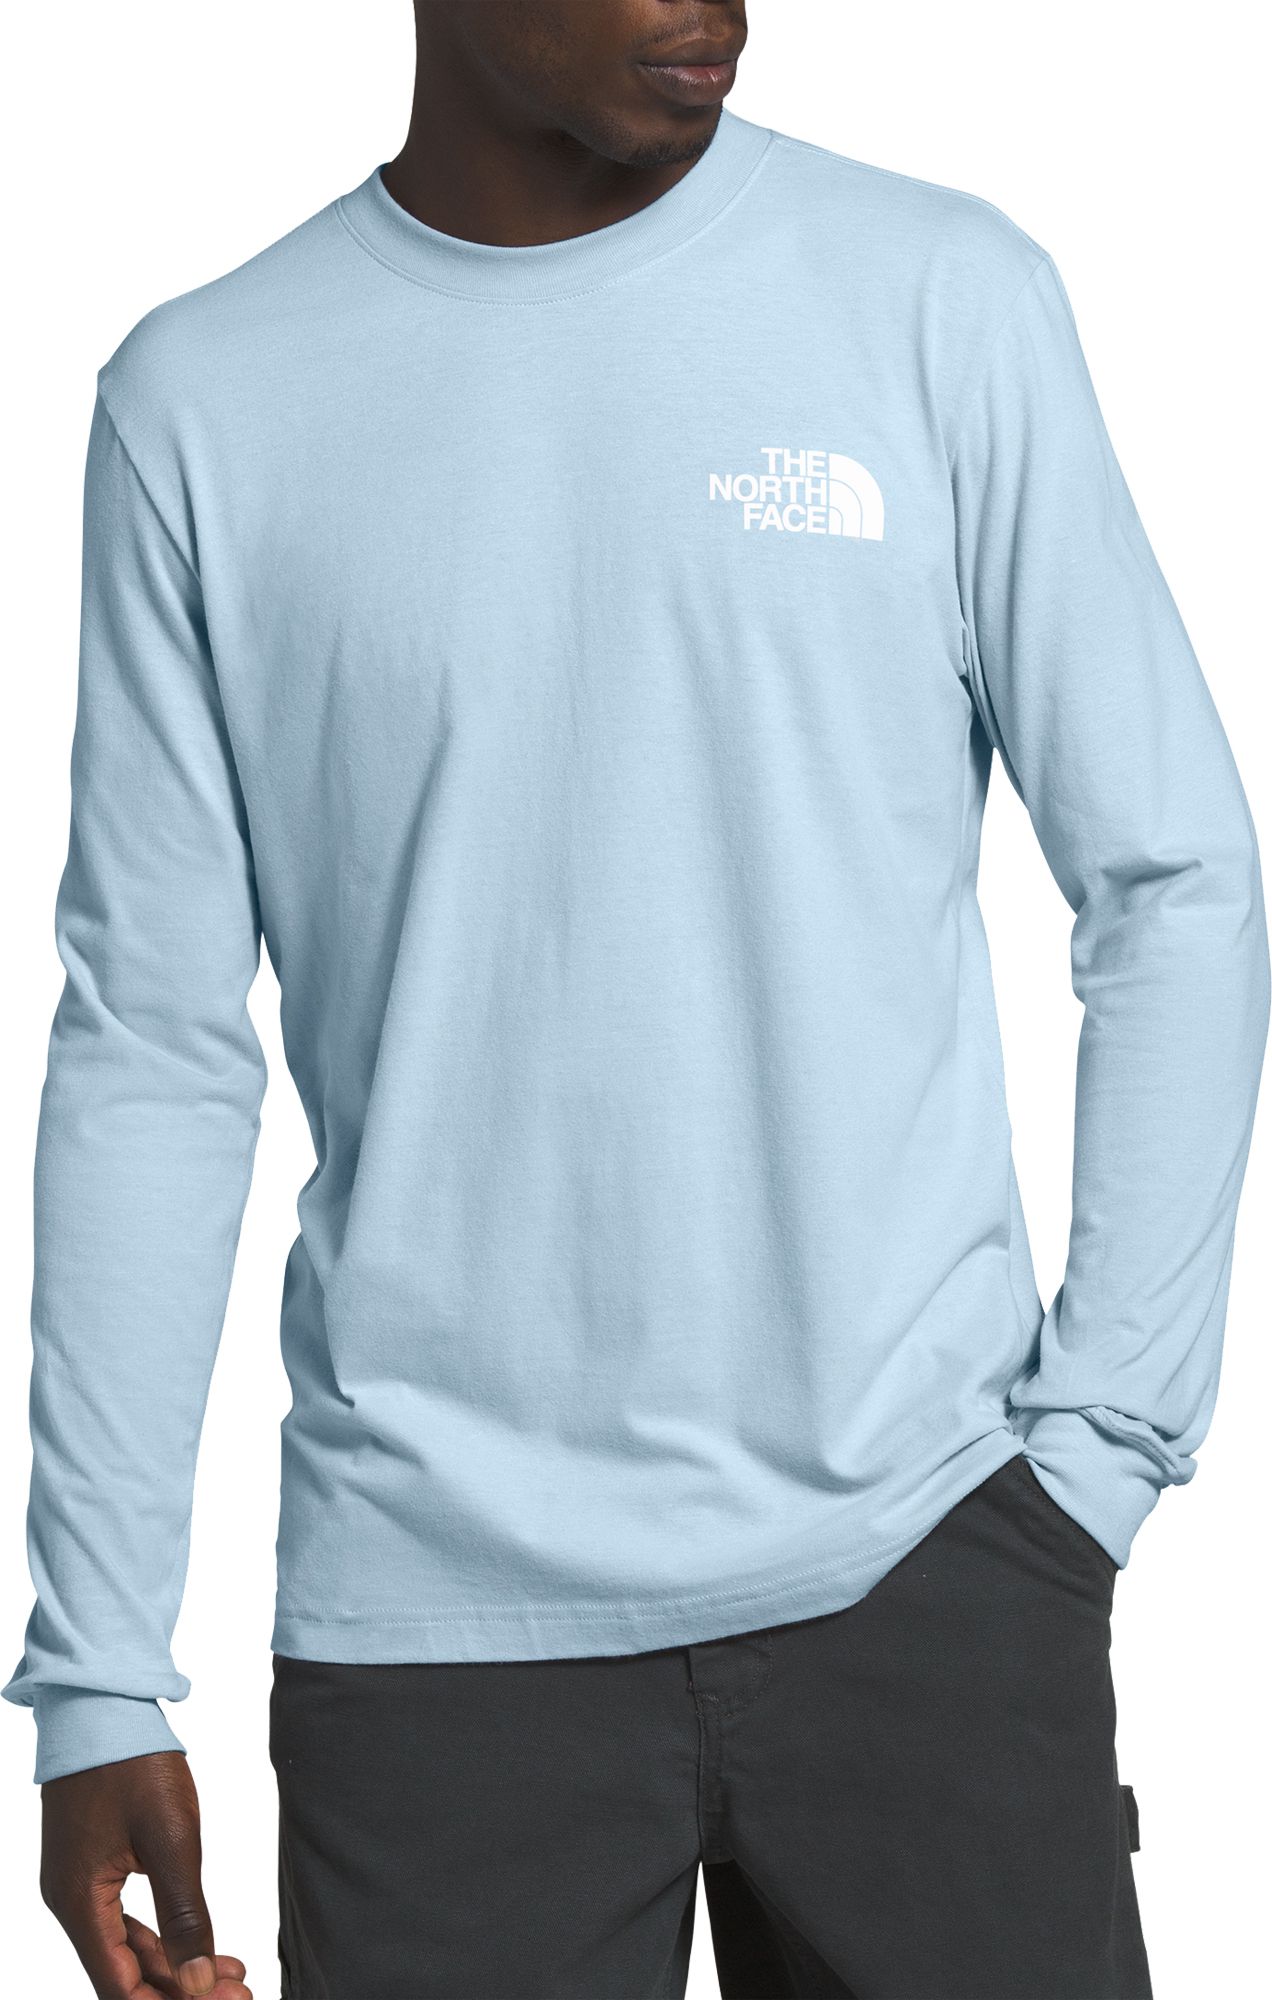 the north face t shirt blue